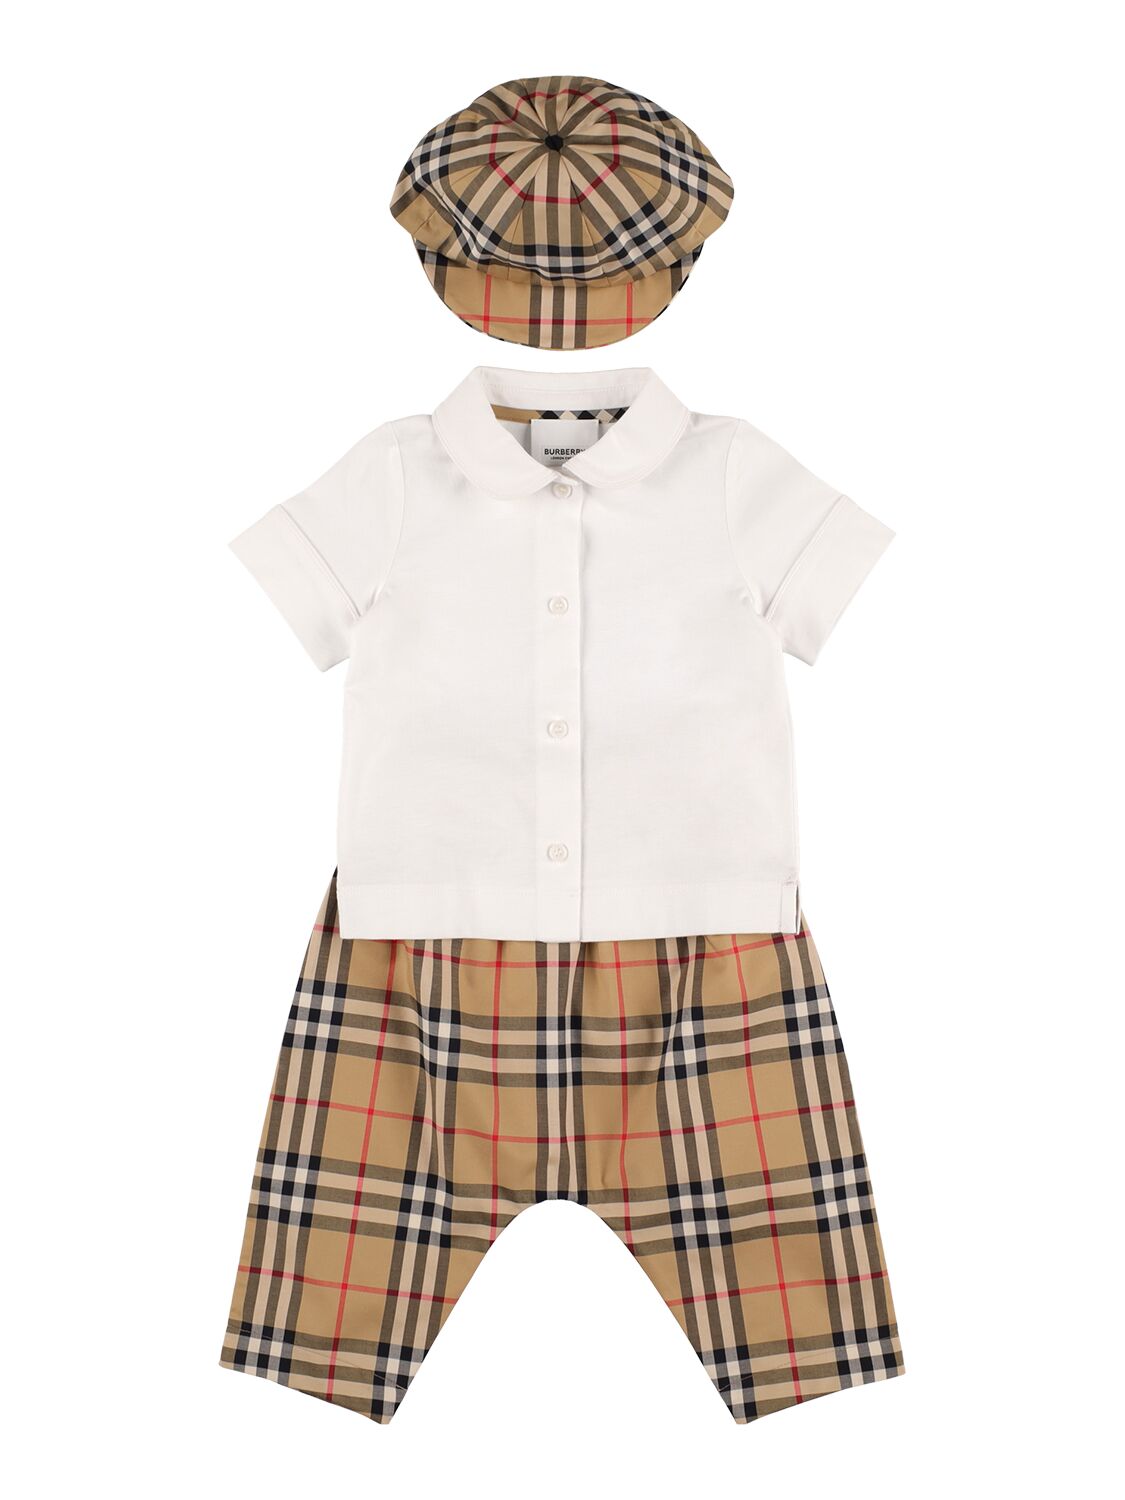 Burberry Babies' Check Print Cotton Shirt, Trousers & Hat In Brown